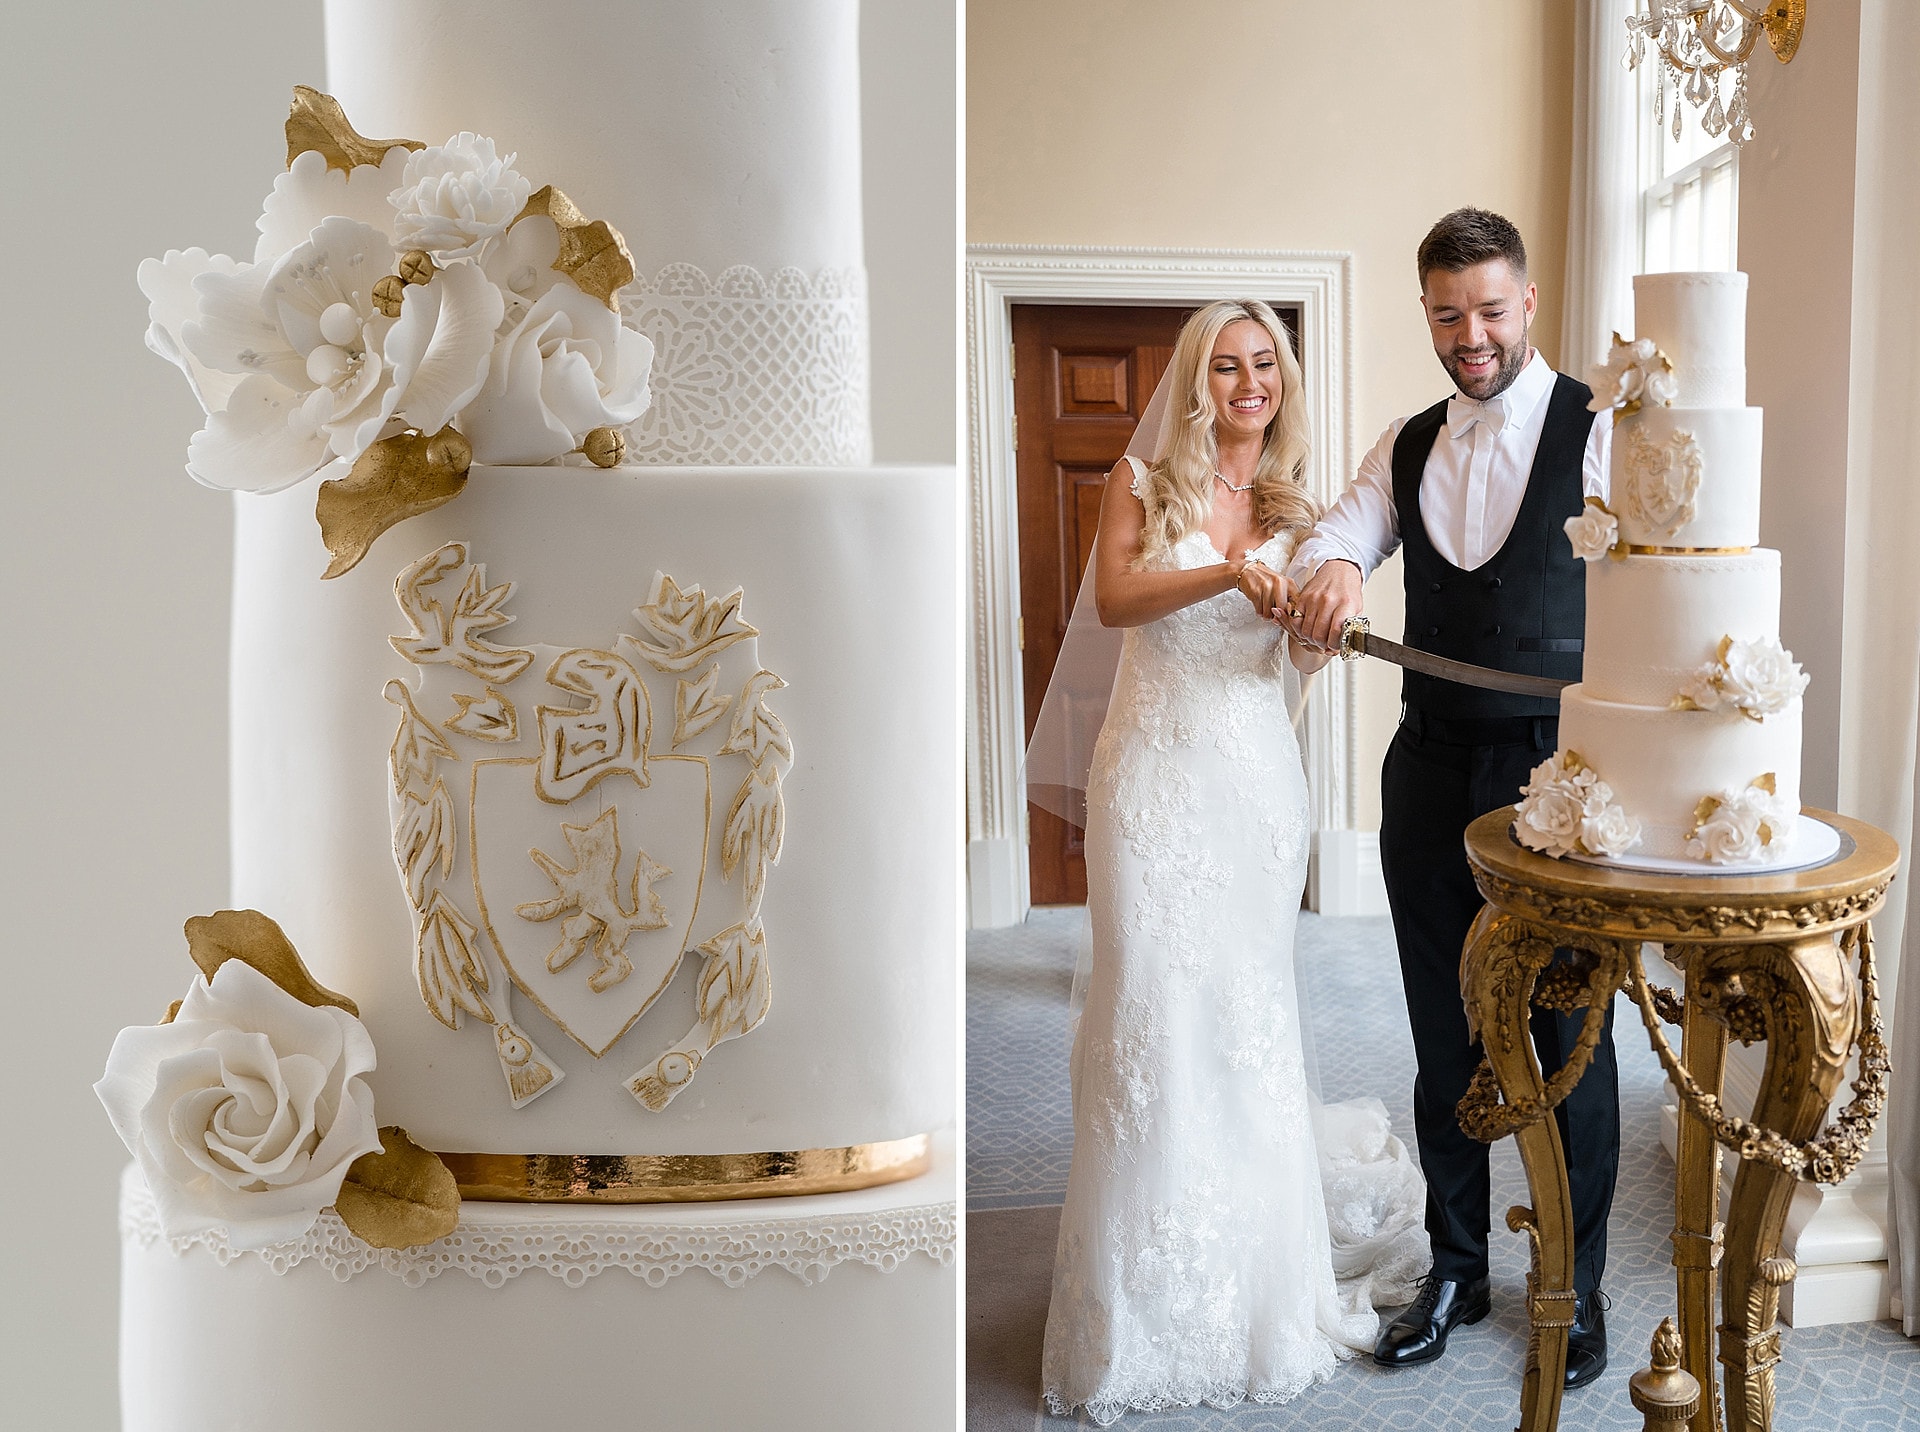 Bride and groom cutting a white and gold wedding cake with a sword